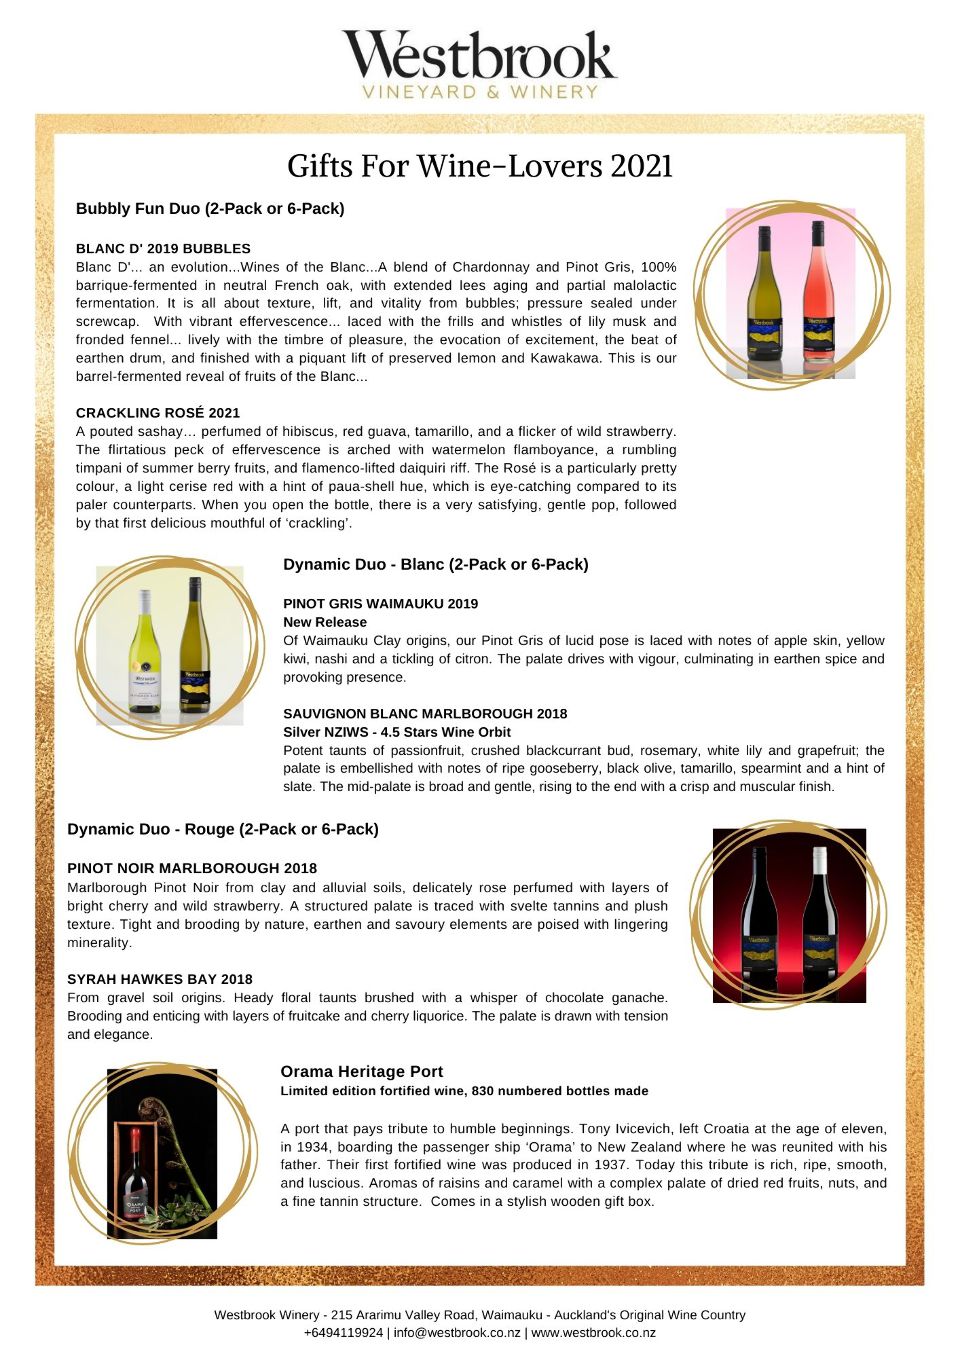 WB Gifts For Wine-Lovers 2021 JPEG order form pg1.jpg